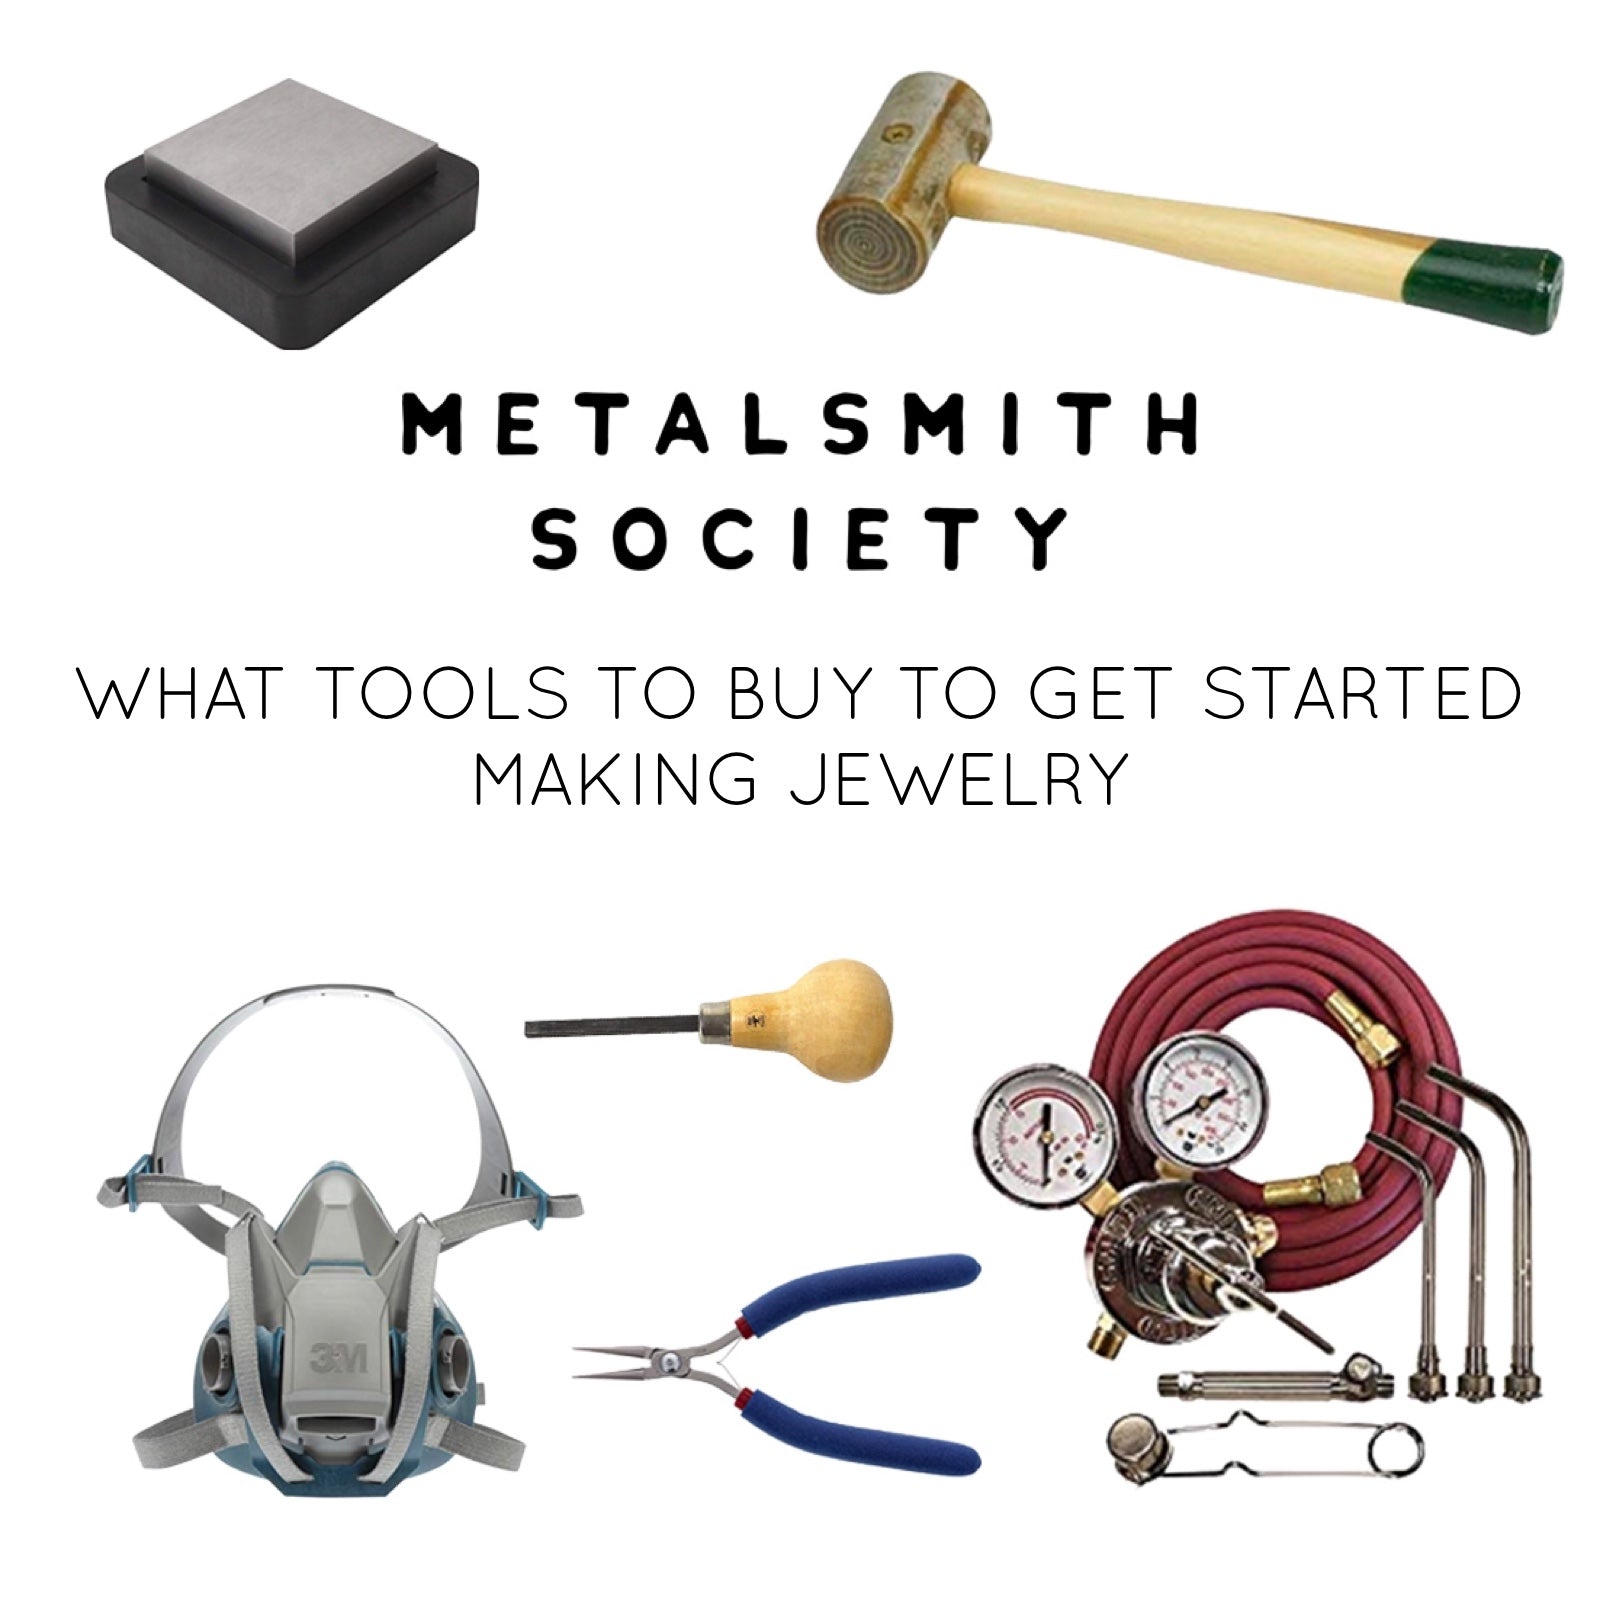 Tools of the Trade: Jewelry Tools and How to Use Them